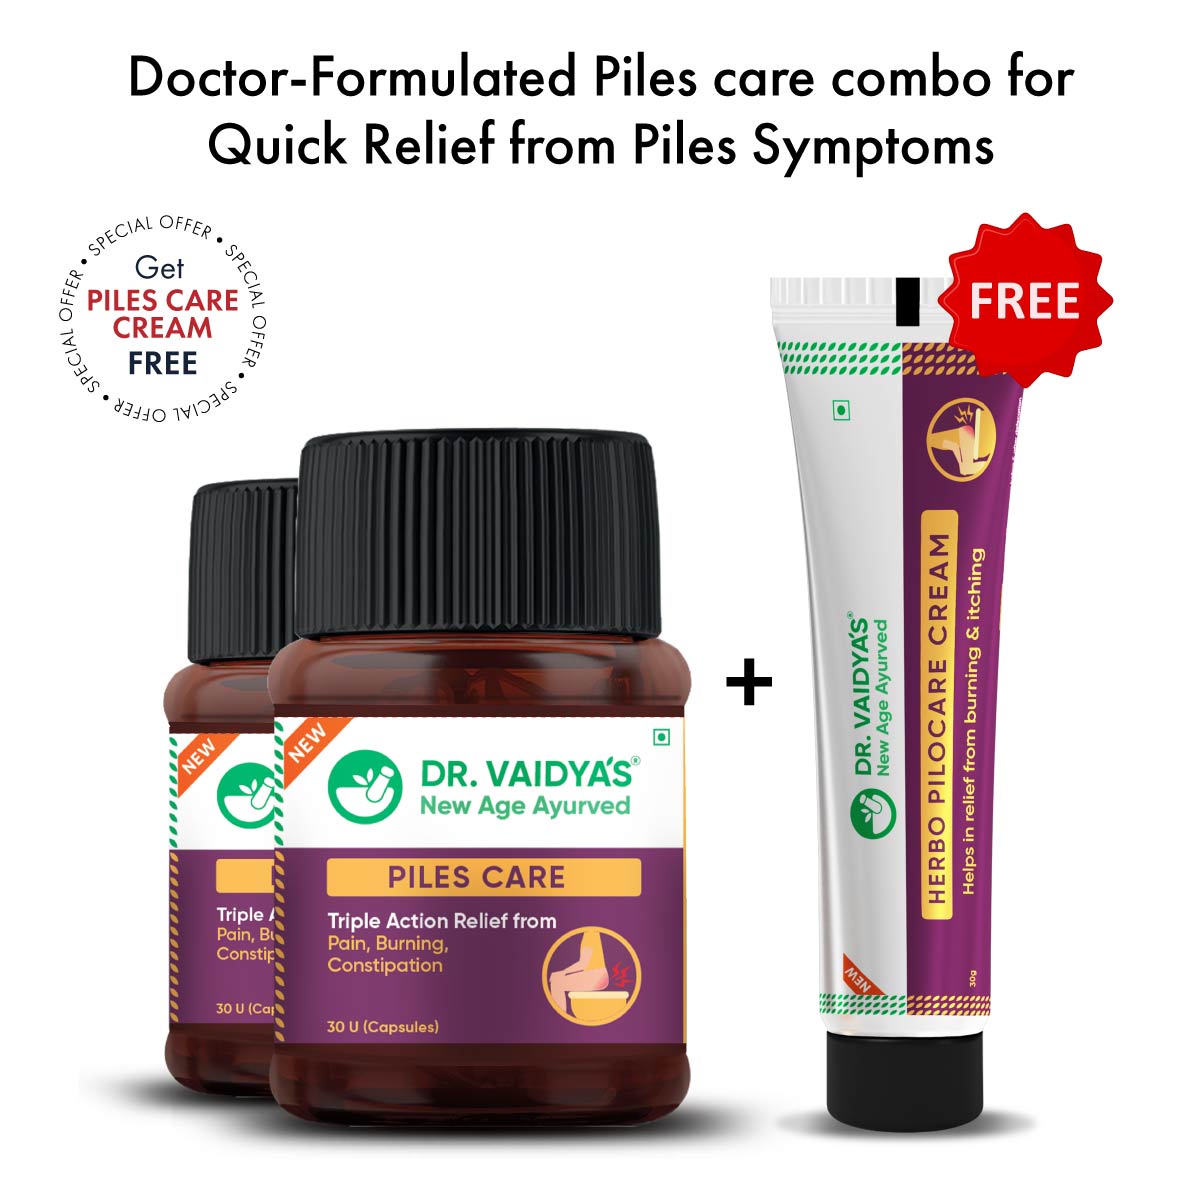 Piles Cream Care Combo: For Managing Piles Naturally